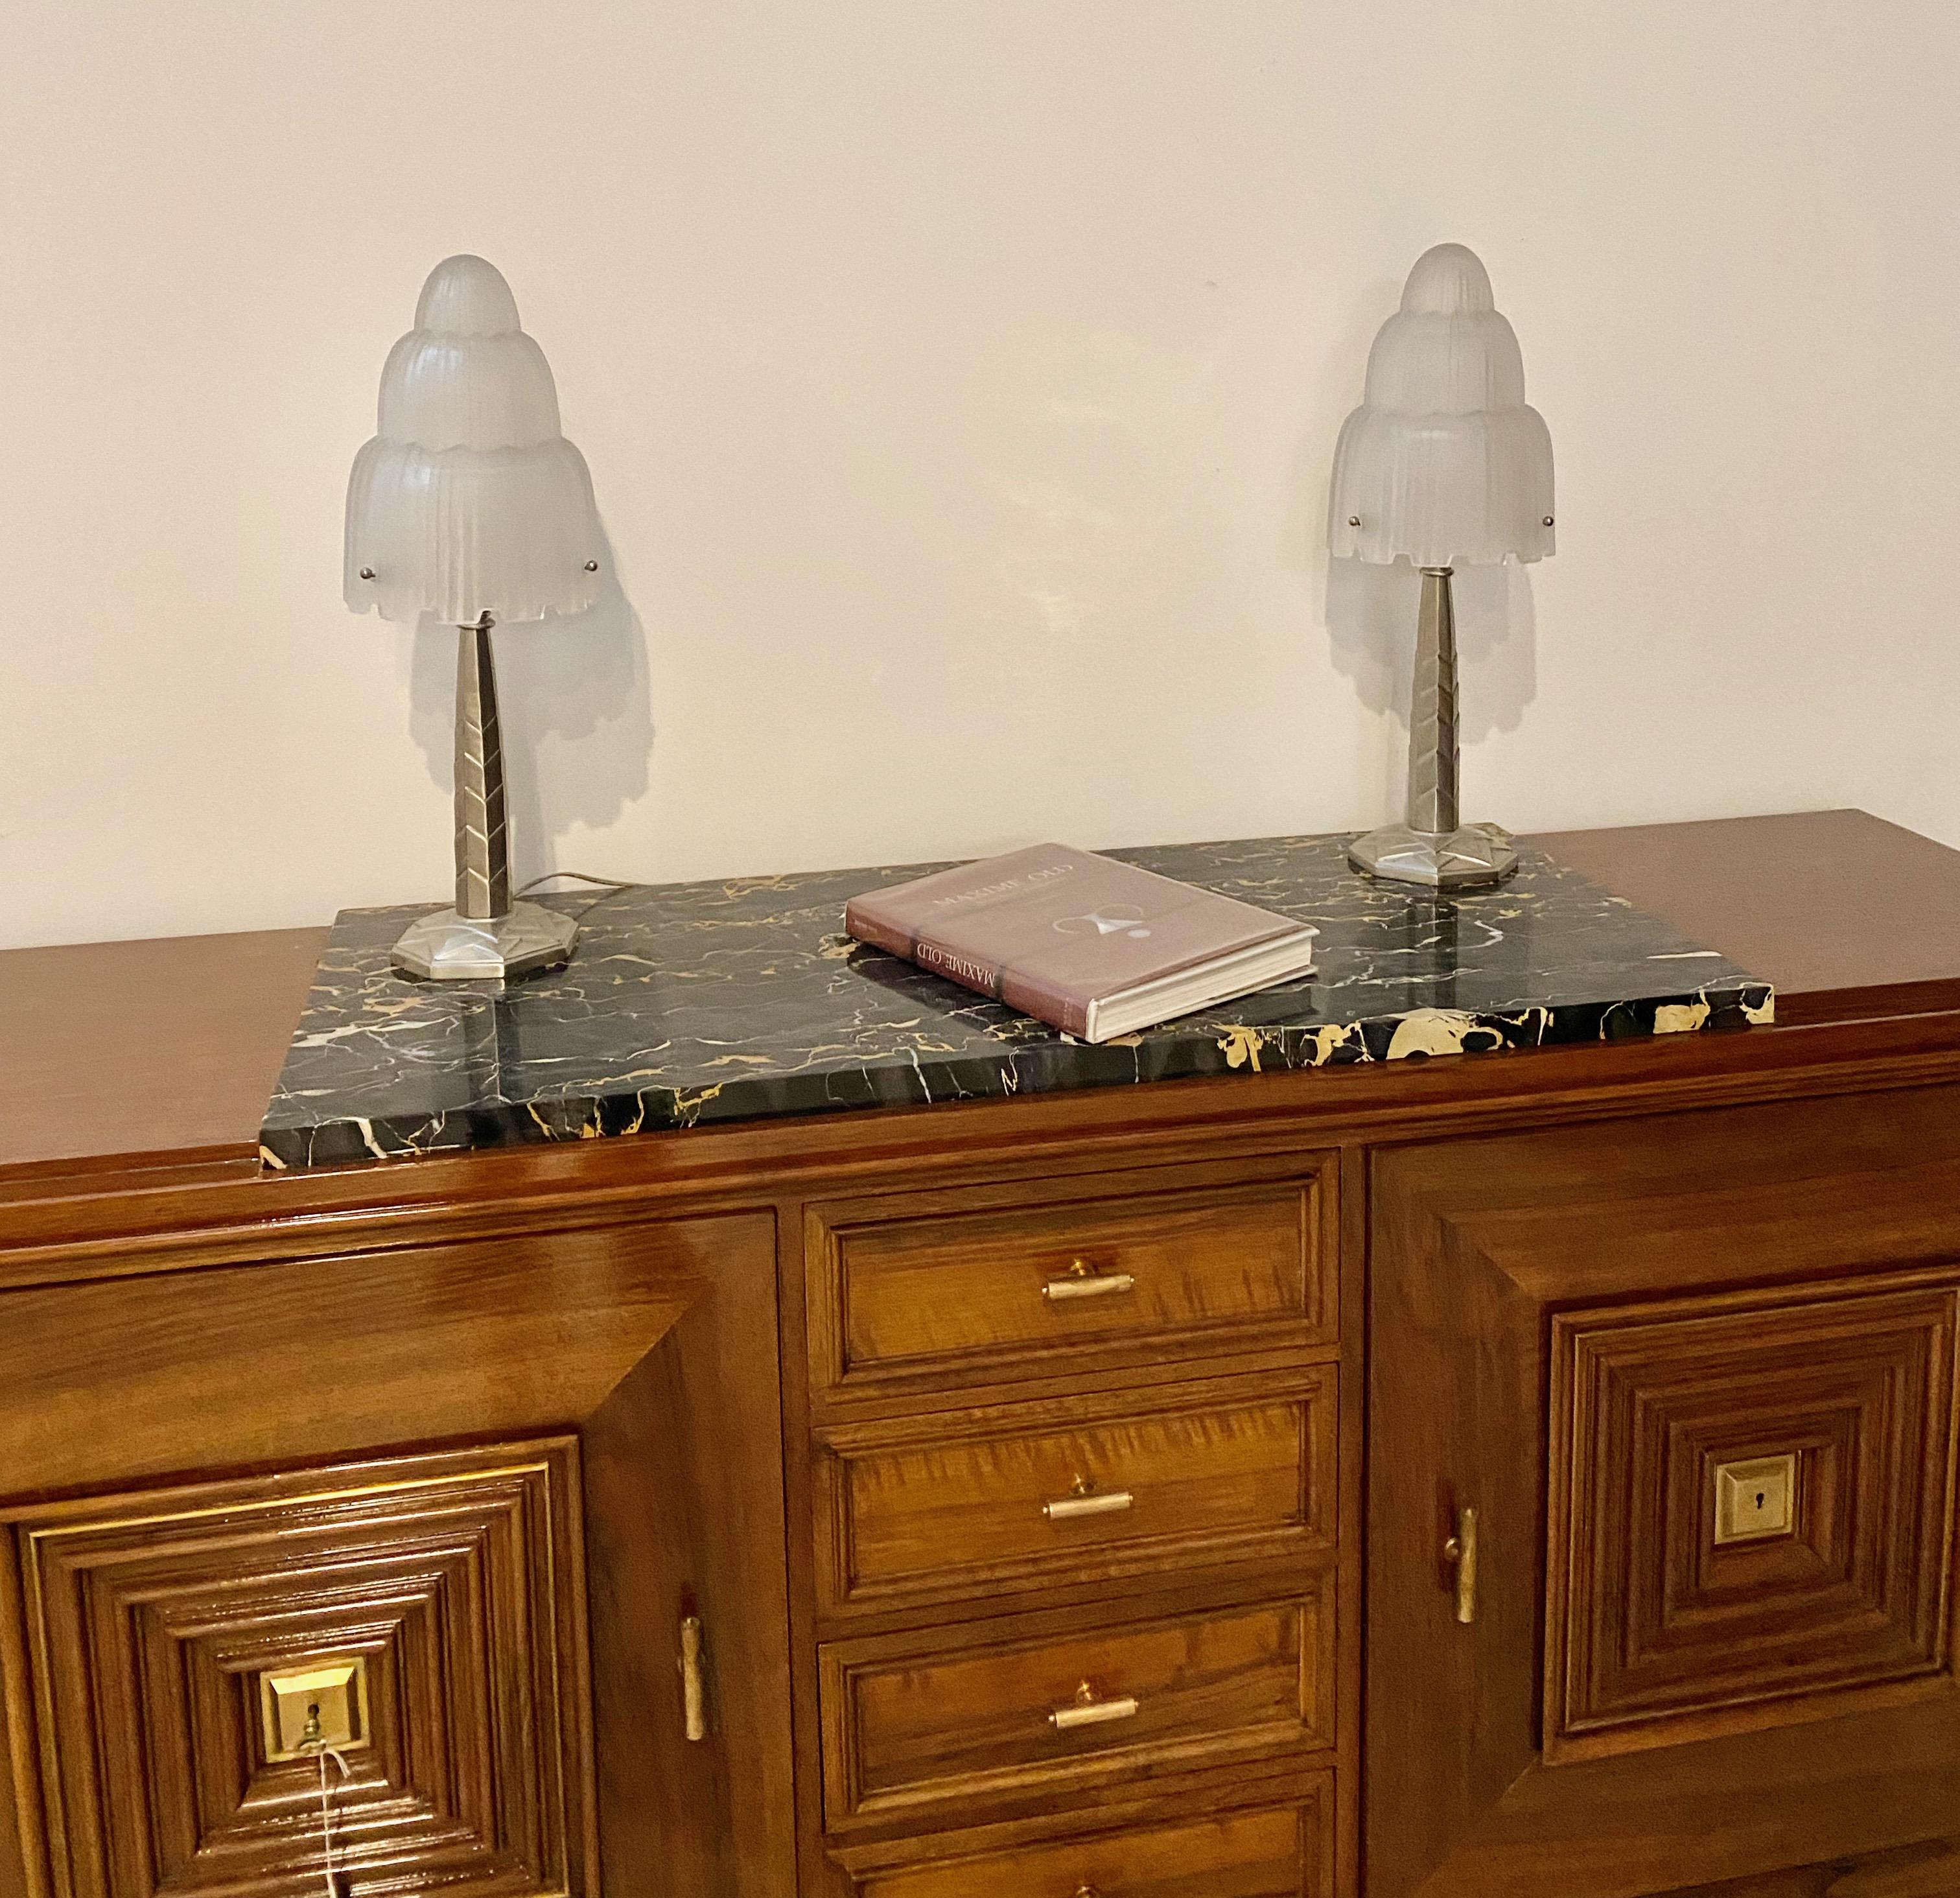 Magnificent pair of French Art Deco table lamps created by Marius Ernest Sabino, (1878-1961). The shades are clear frosted glass with polished details referred to as the 